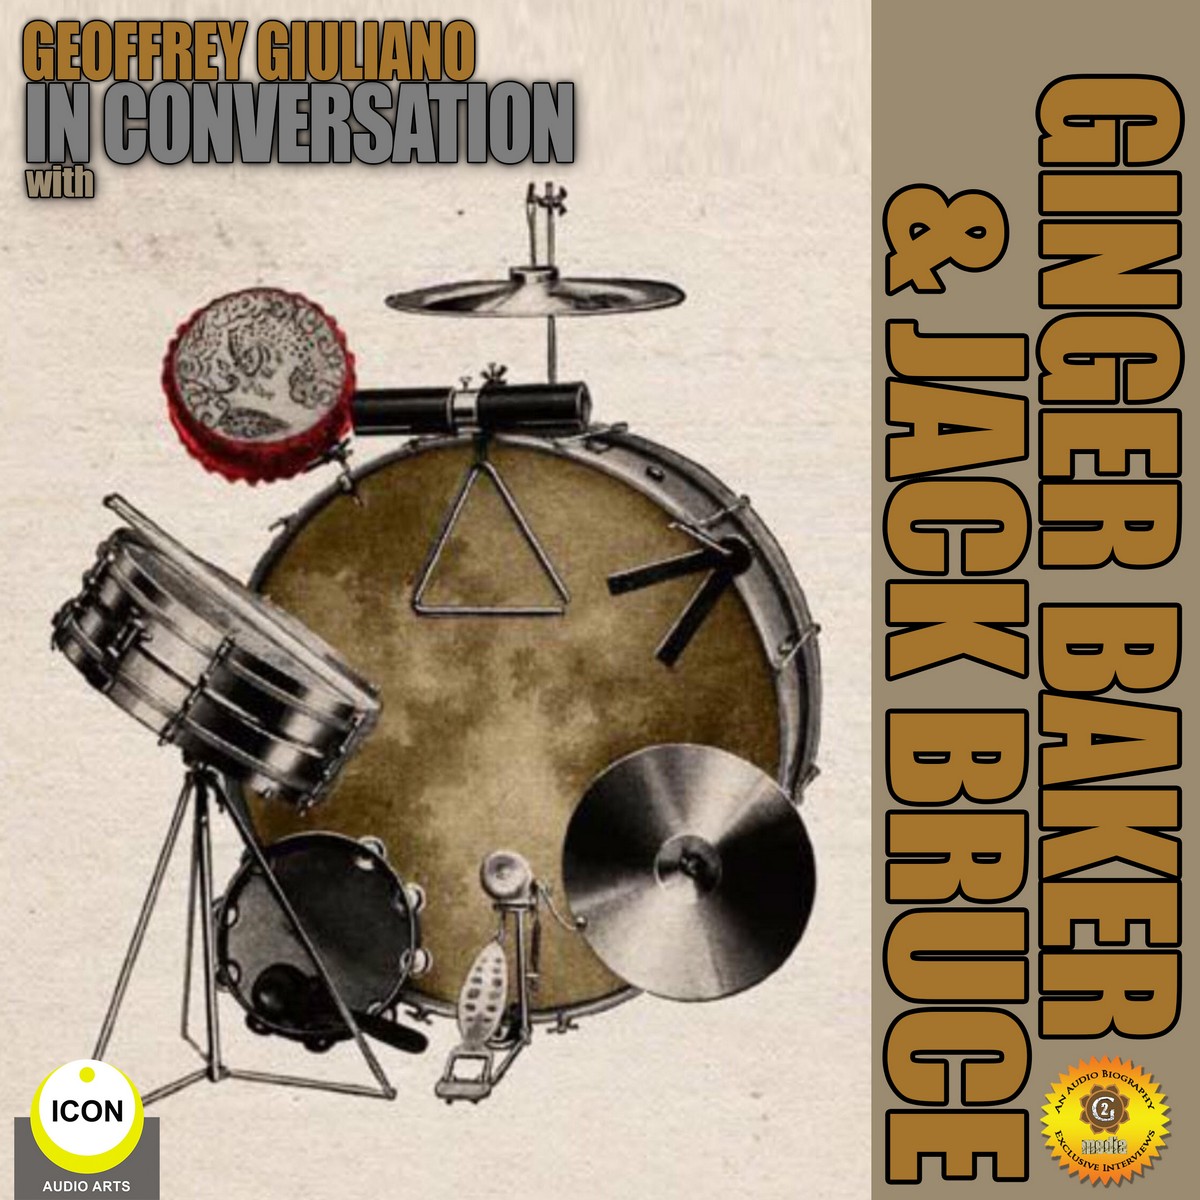 Geoffrey Giuliano’s In Conversation with Ginger Baker & Jack Bruce